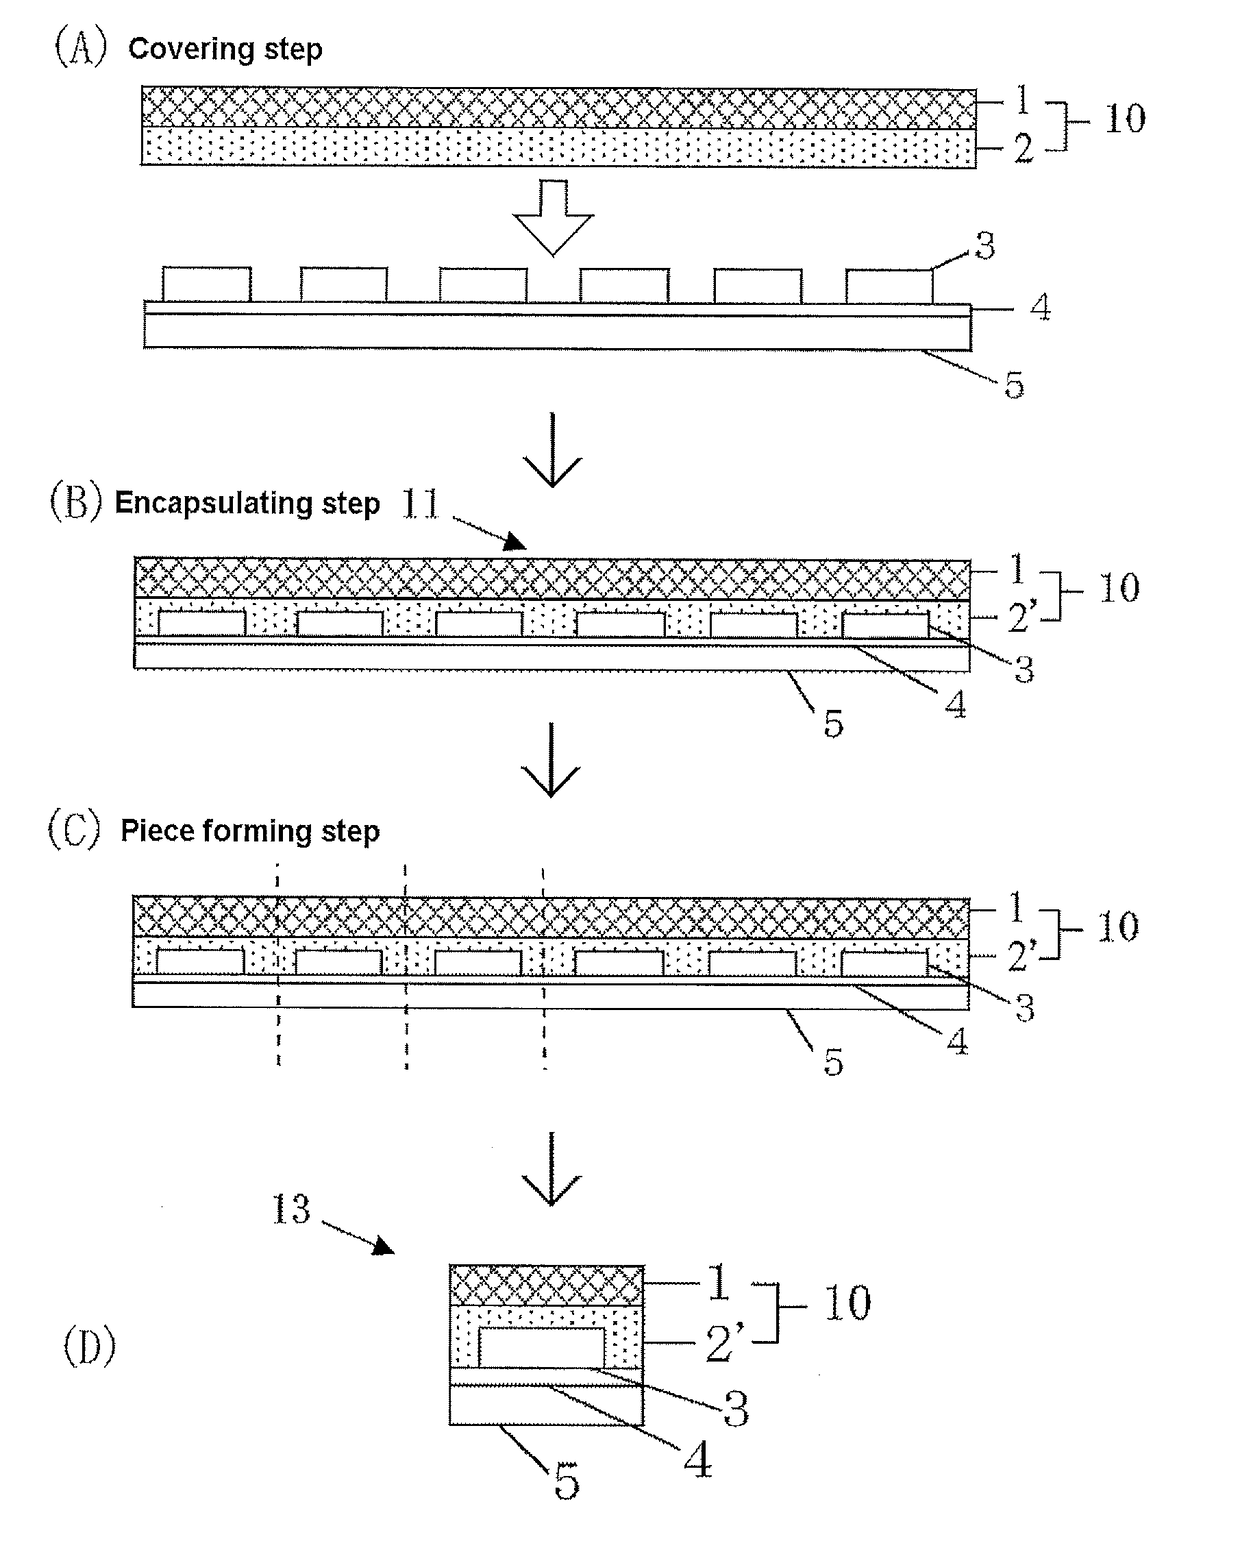 Electromagnetic wave shielding support base-attached encapsulant, encapsulated substrate having semicondutor devices mounted thereon, encapsulated wafer having semiconductor devices formed thereon, and semiconductor apparatus